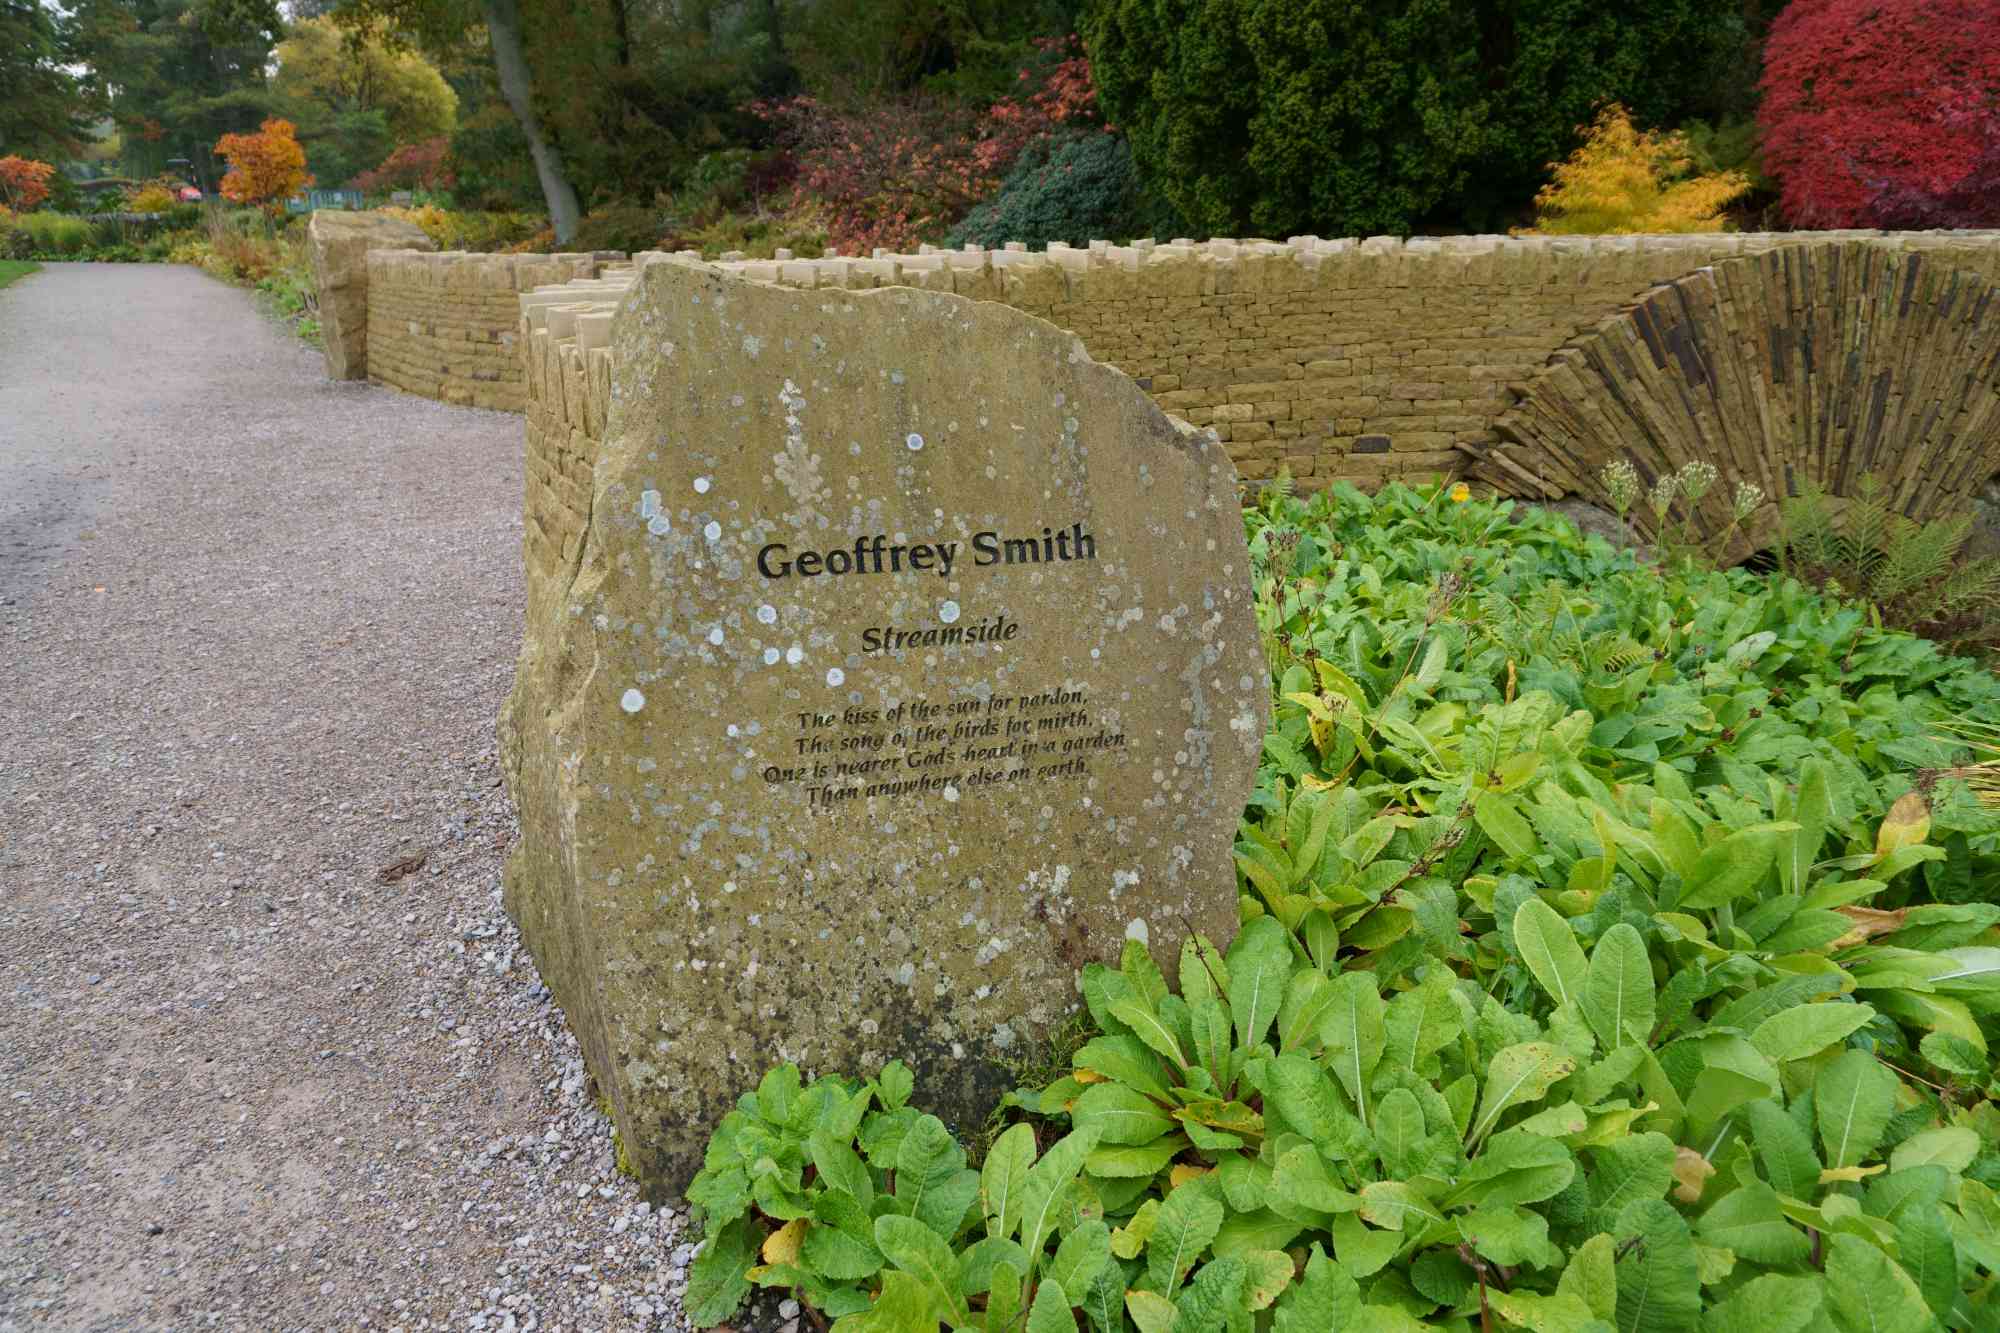 The Geoffrey Smith memorial stone is positioned at one end of the bridge wall as a lasting testament to a much-loved former garden curator